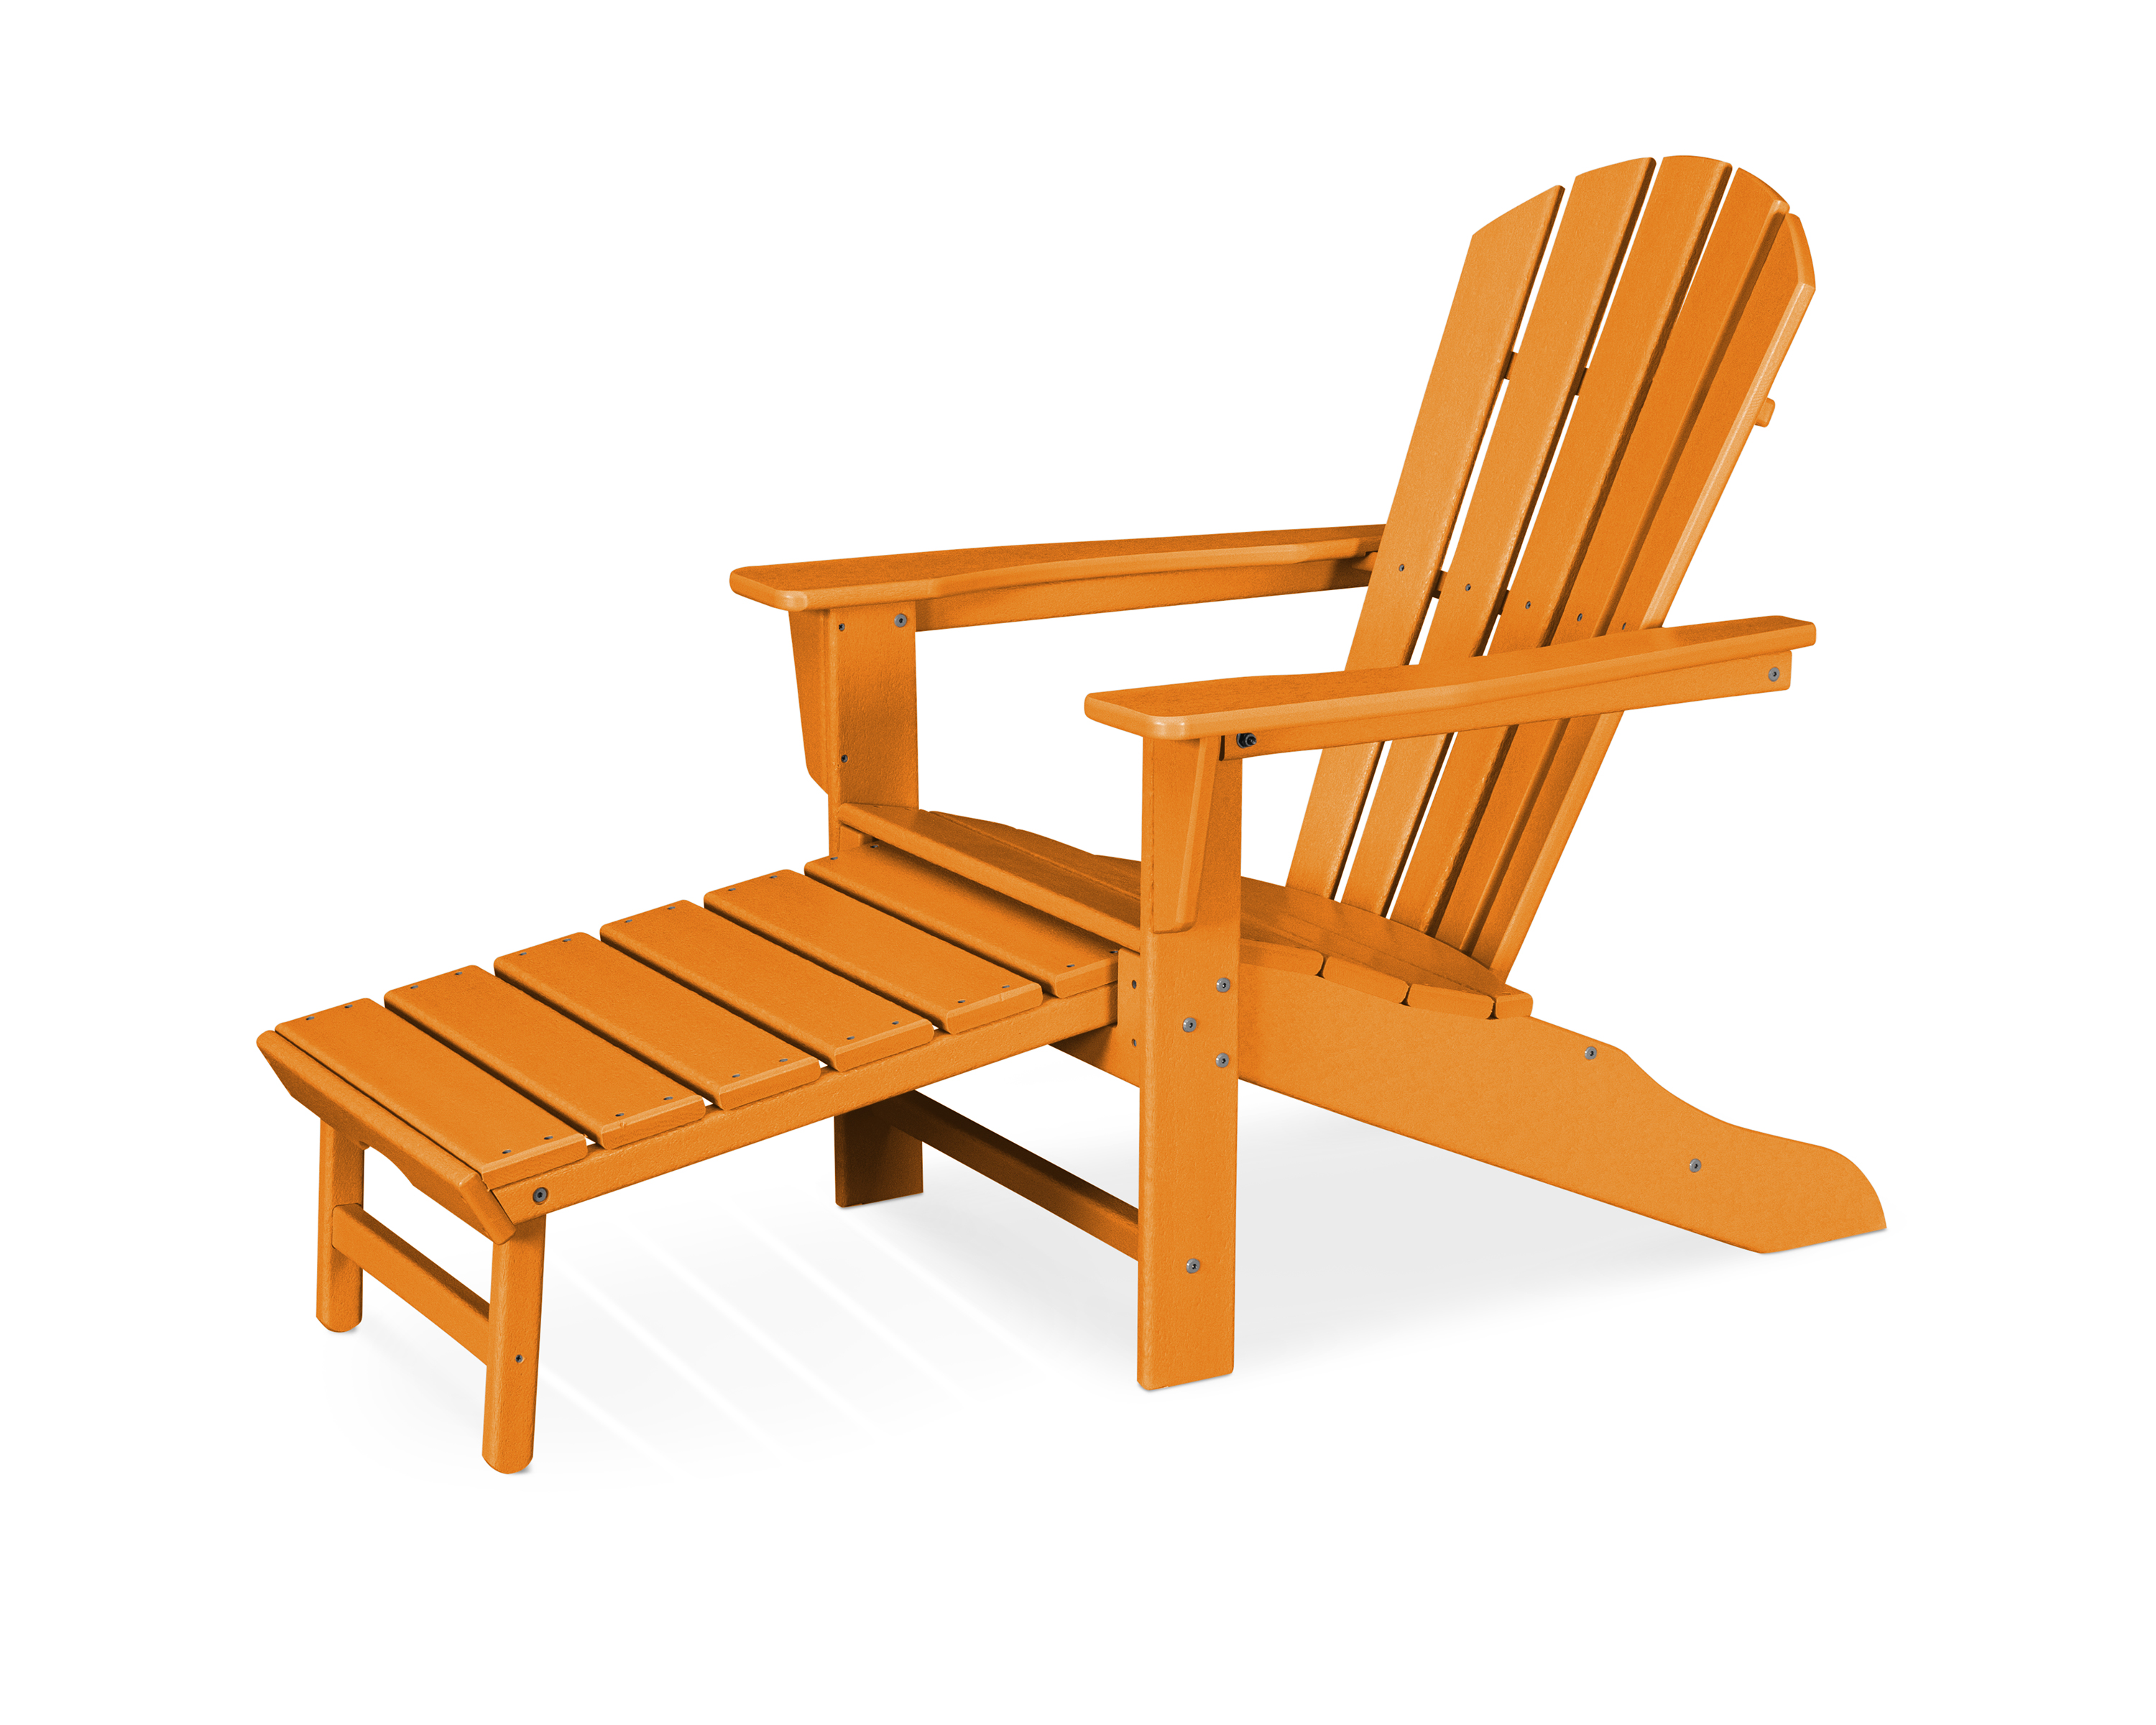 palm coast ultimate adirondack with hideaway ottoman in tangerine thumbnail image